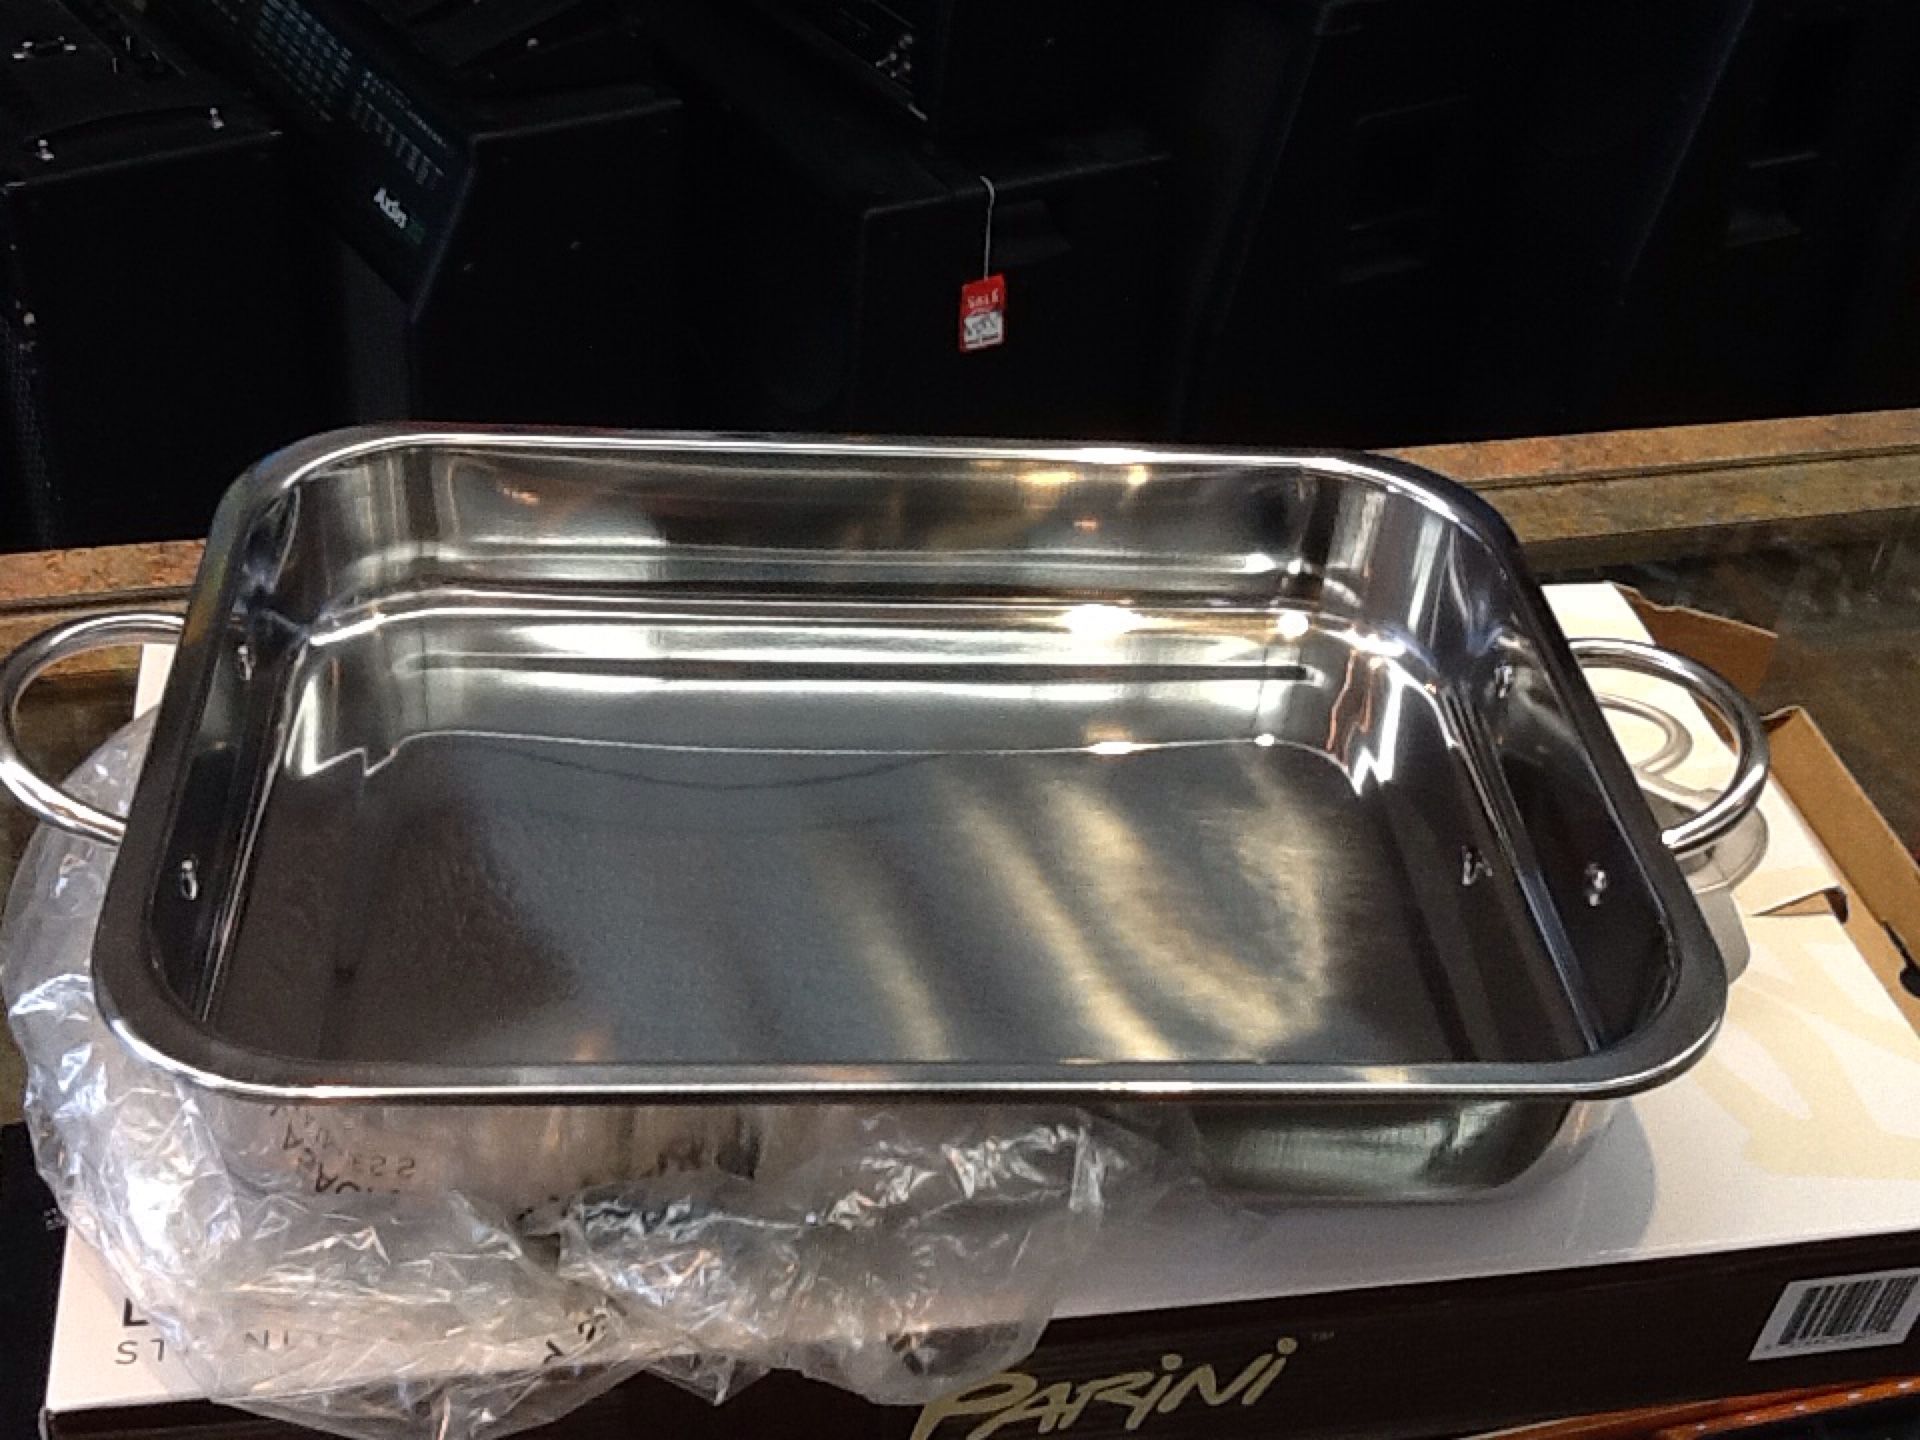 Parini lasagna pan stainless steel for Sale in Placentia, CA - OfferUp